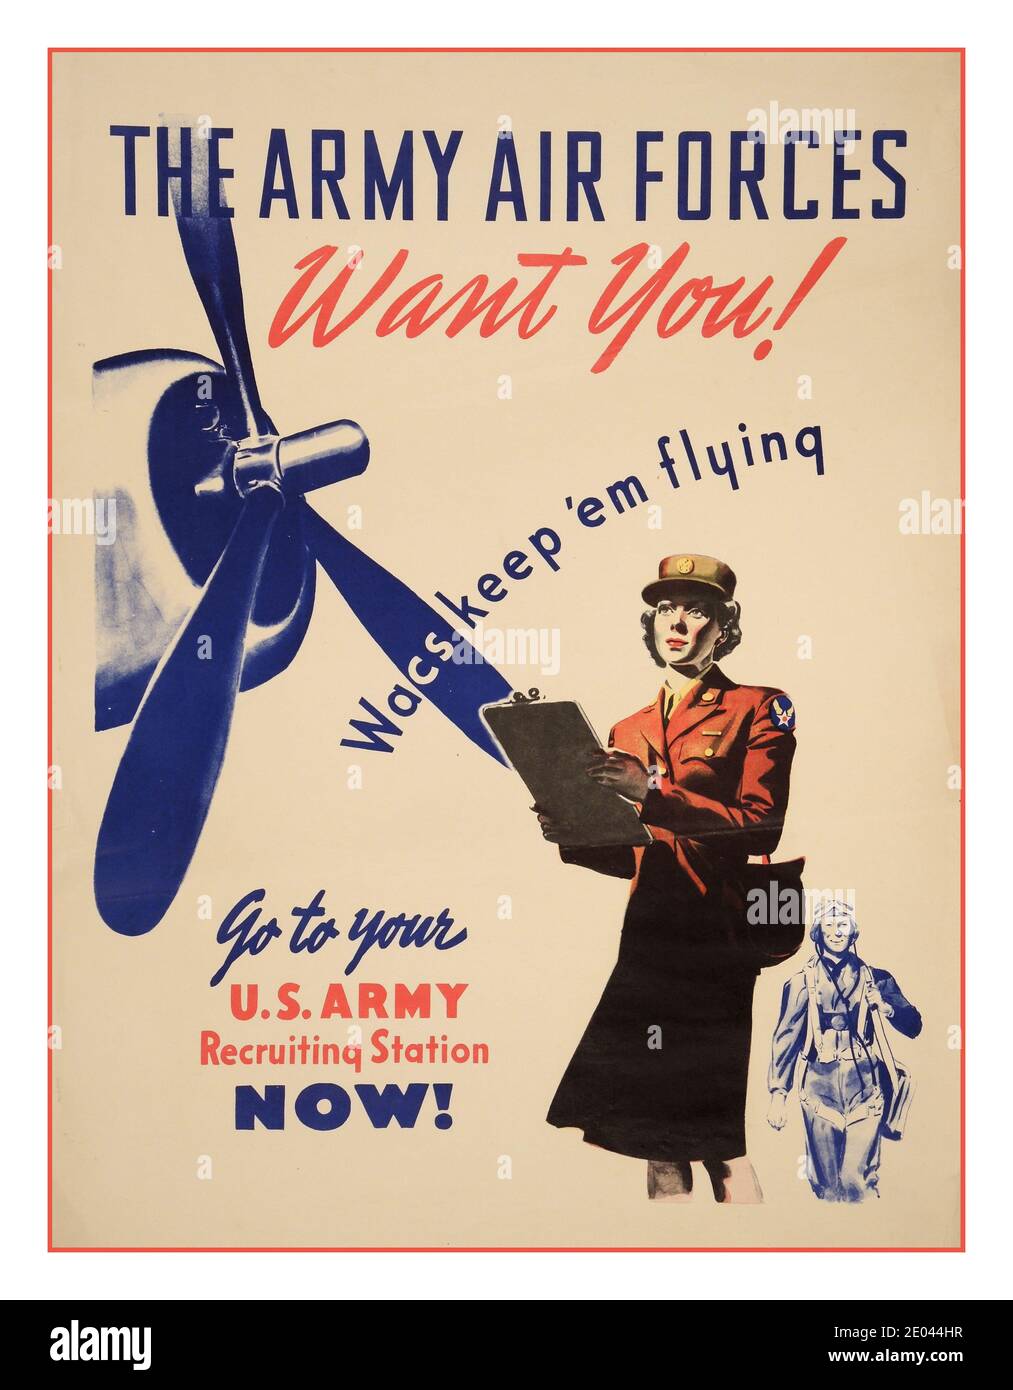 Vintage WW2 ‘The Army Air forces WANT YOU “ recruitment poster 1940’s ‘WACS keep them flying’ US ARMY AIR FORCES RECRUITMENT WW2 Second World War World War II Stock Photo